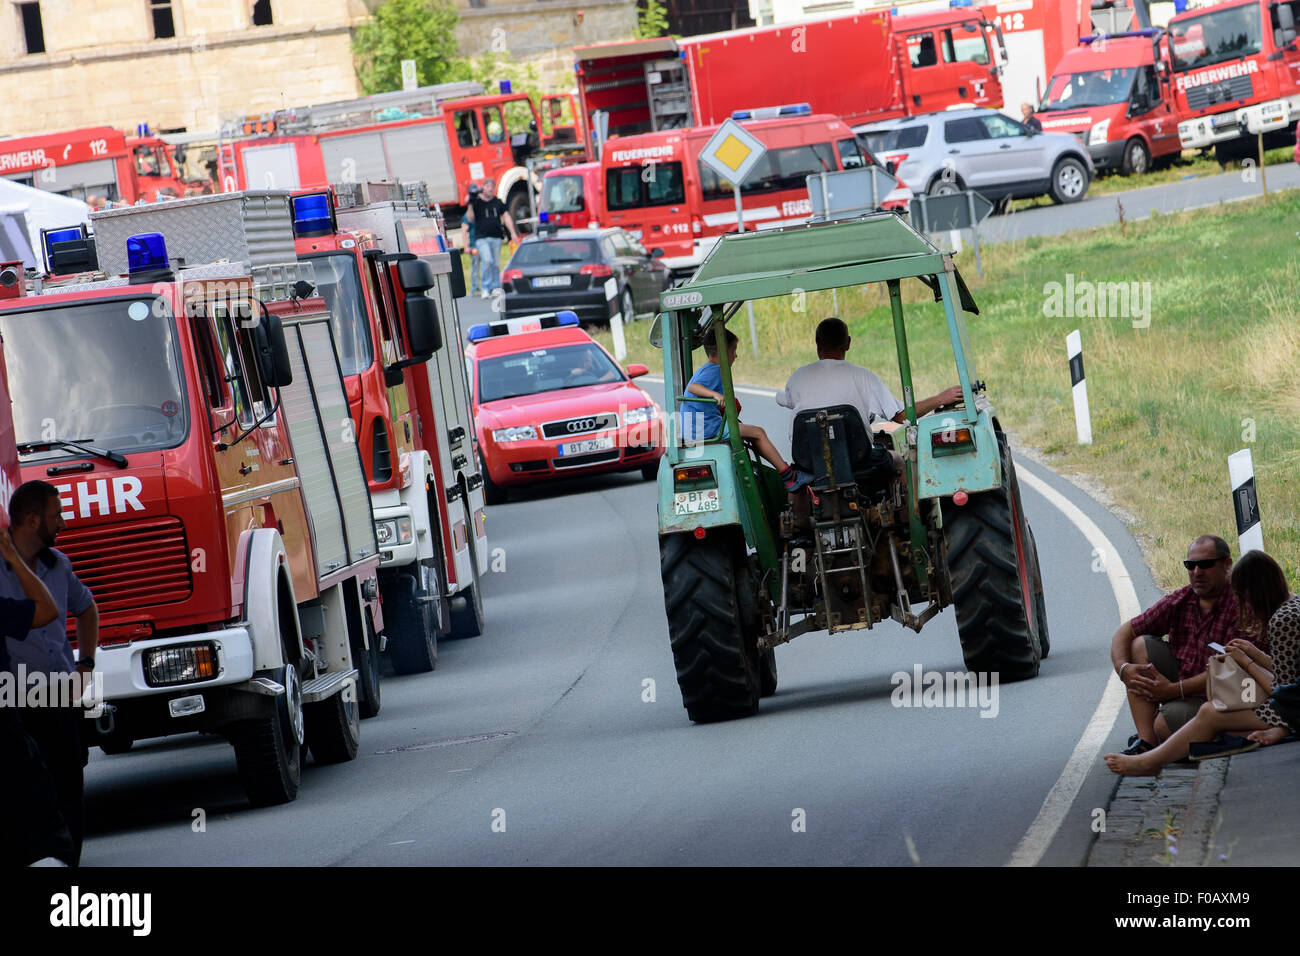 Engelmannsreuth, Germany. 11th Aug, 2015. A farmer drives past several fire engines in Engelmannsreuth, Germany, 11 August 2015. An F-16 fighter aircraft of the US Air Force crashed near Engelmannsreuth. Photo: NICOLAS ARMER/dpa/Alamy Live News Stock Photo